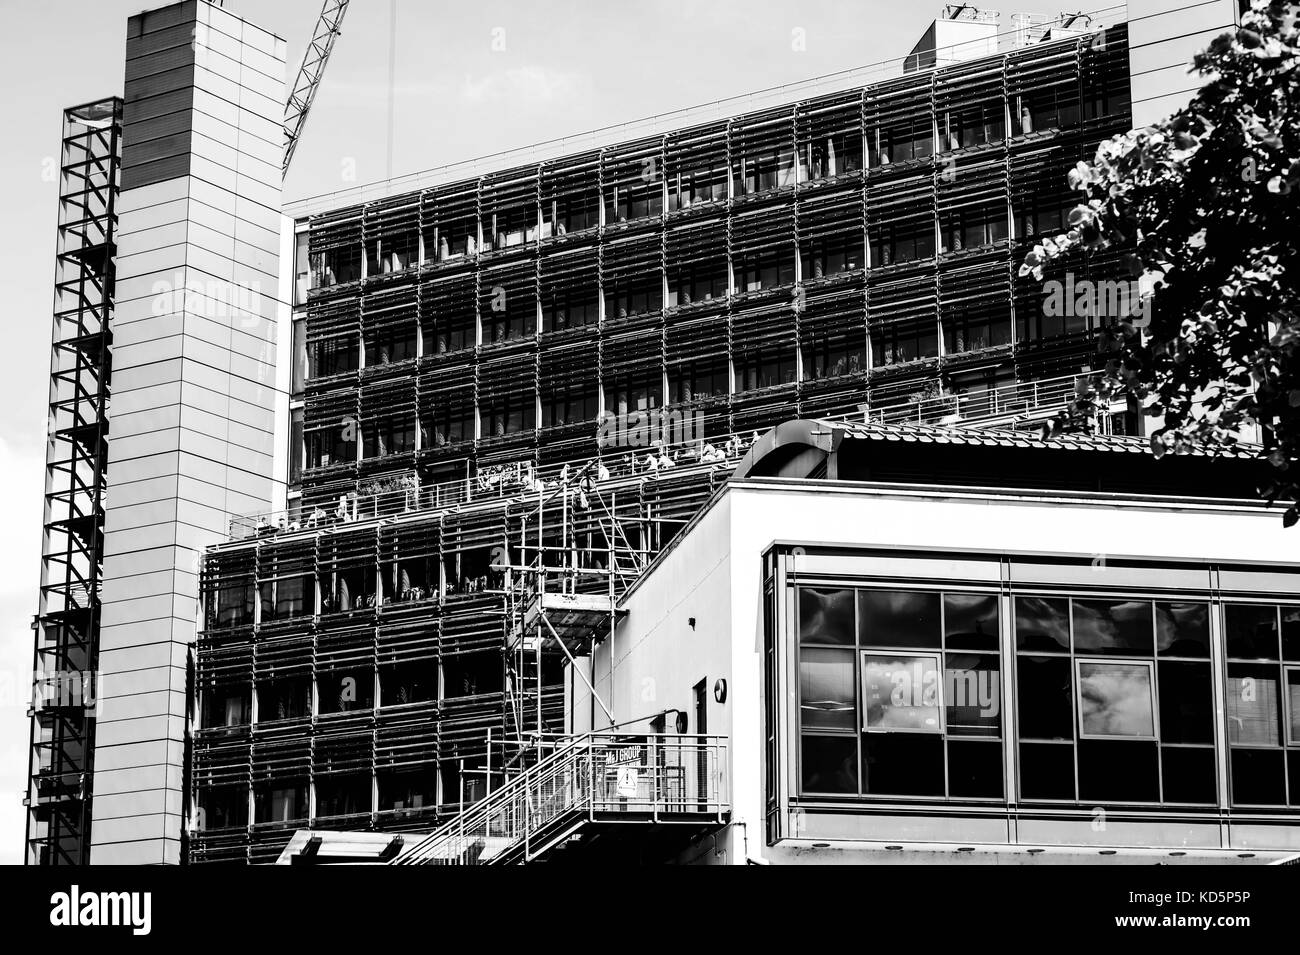 Black and White Monochrome Image Of Buildings in Paddington West London Showing a Mix of Old and New And Investment in the Property Market Stock Photo